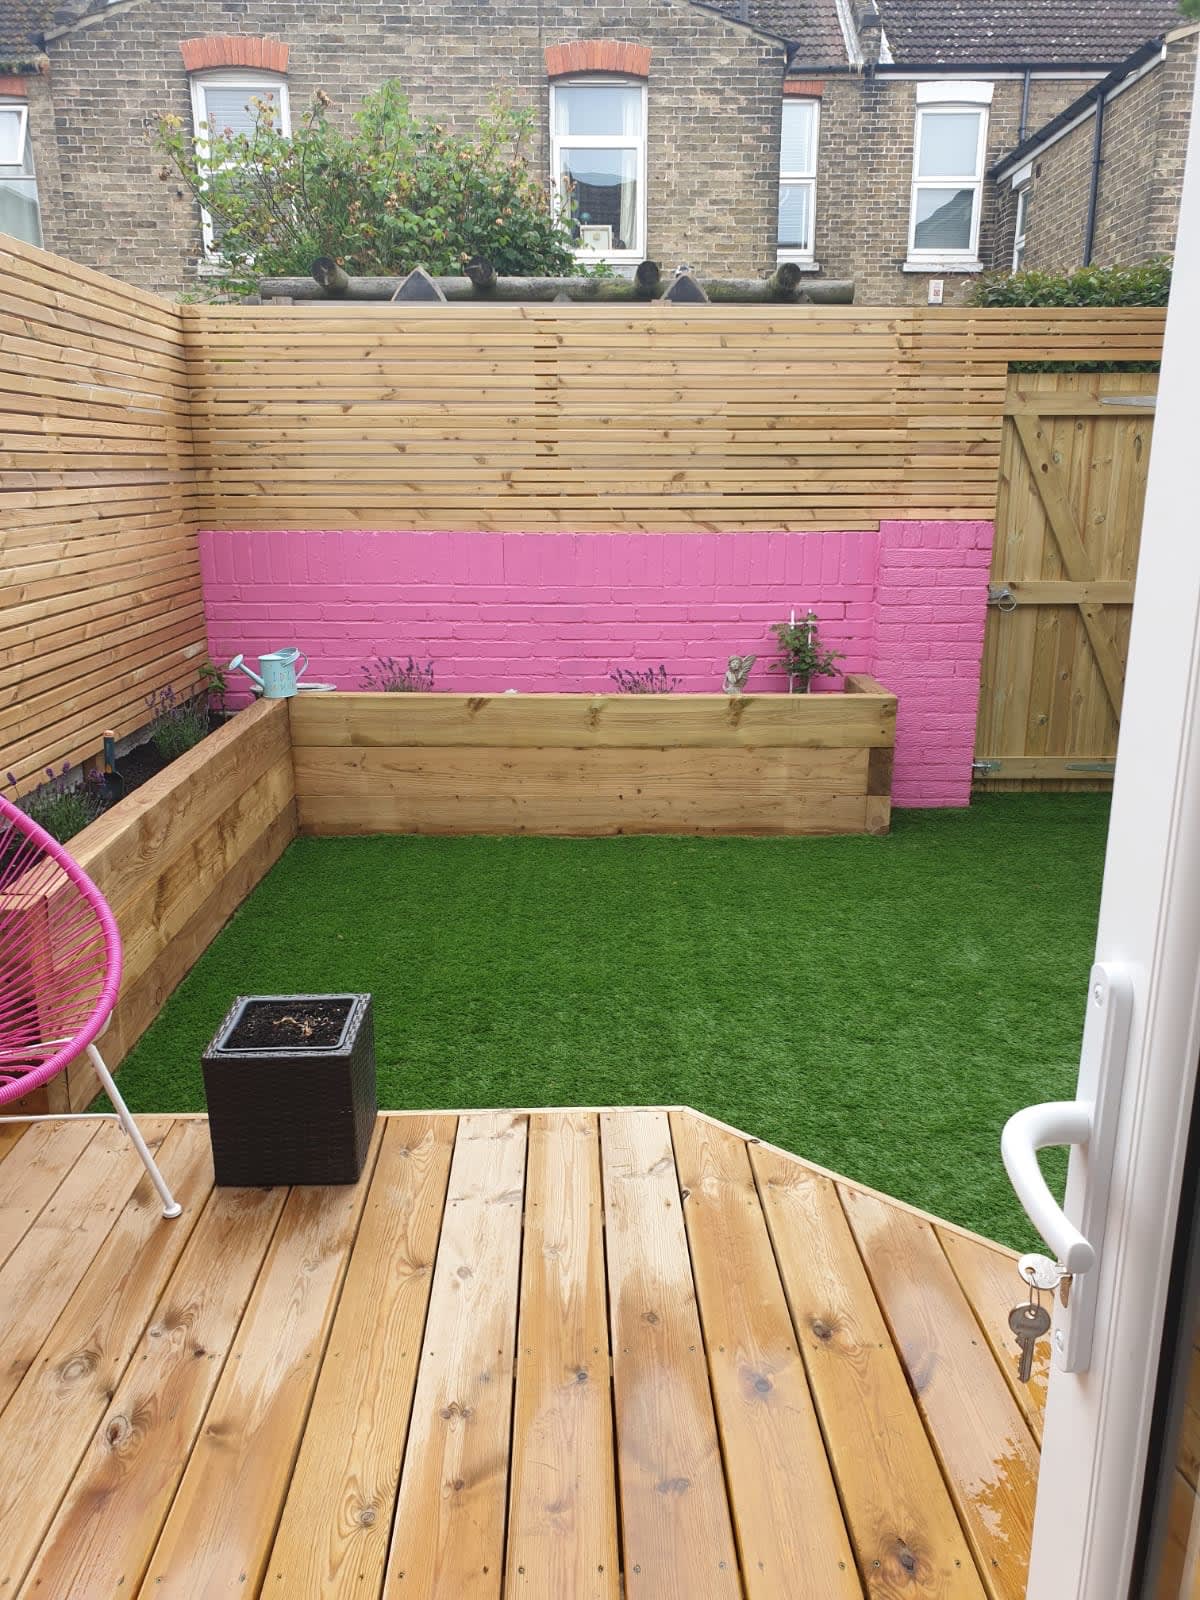 Images Desirable Decking & Landscaping